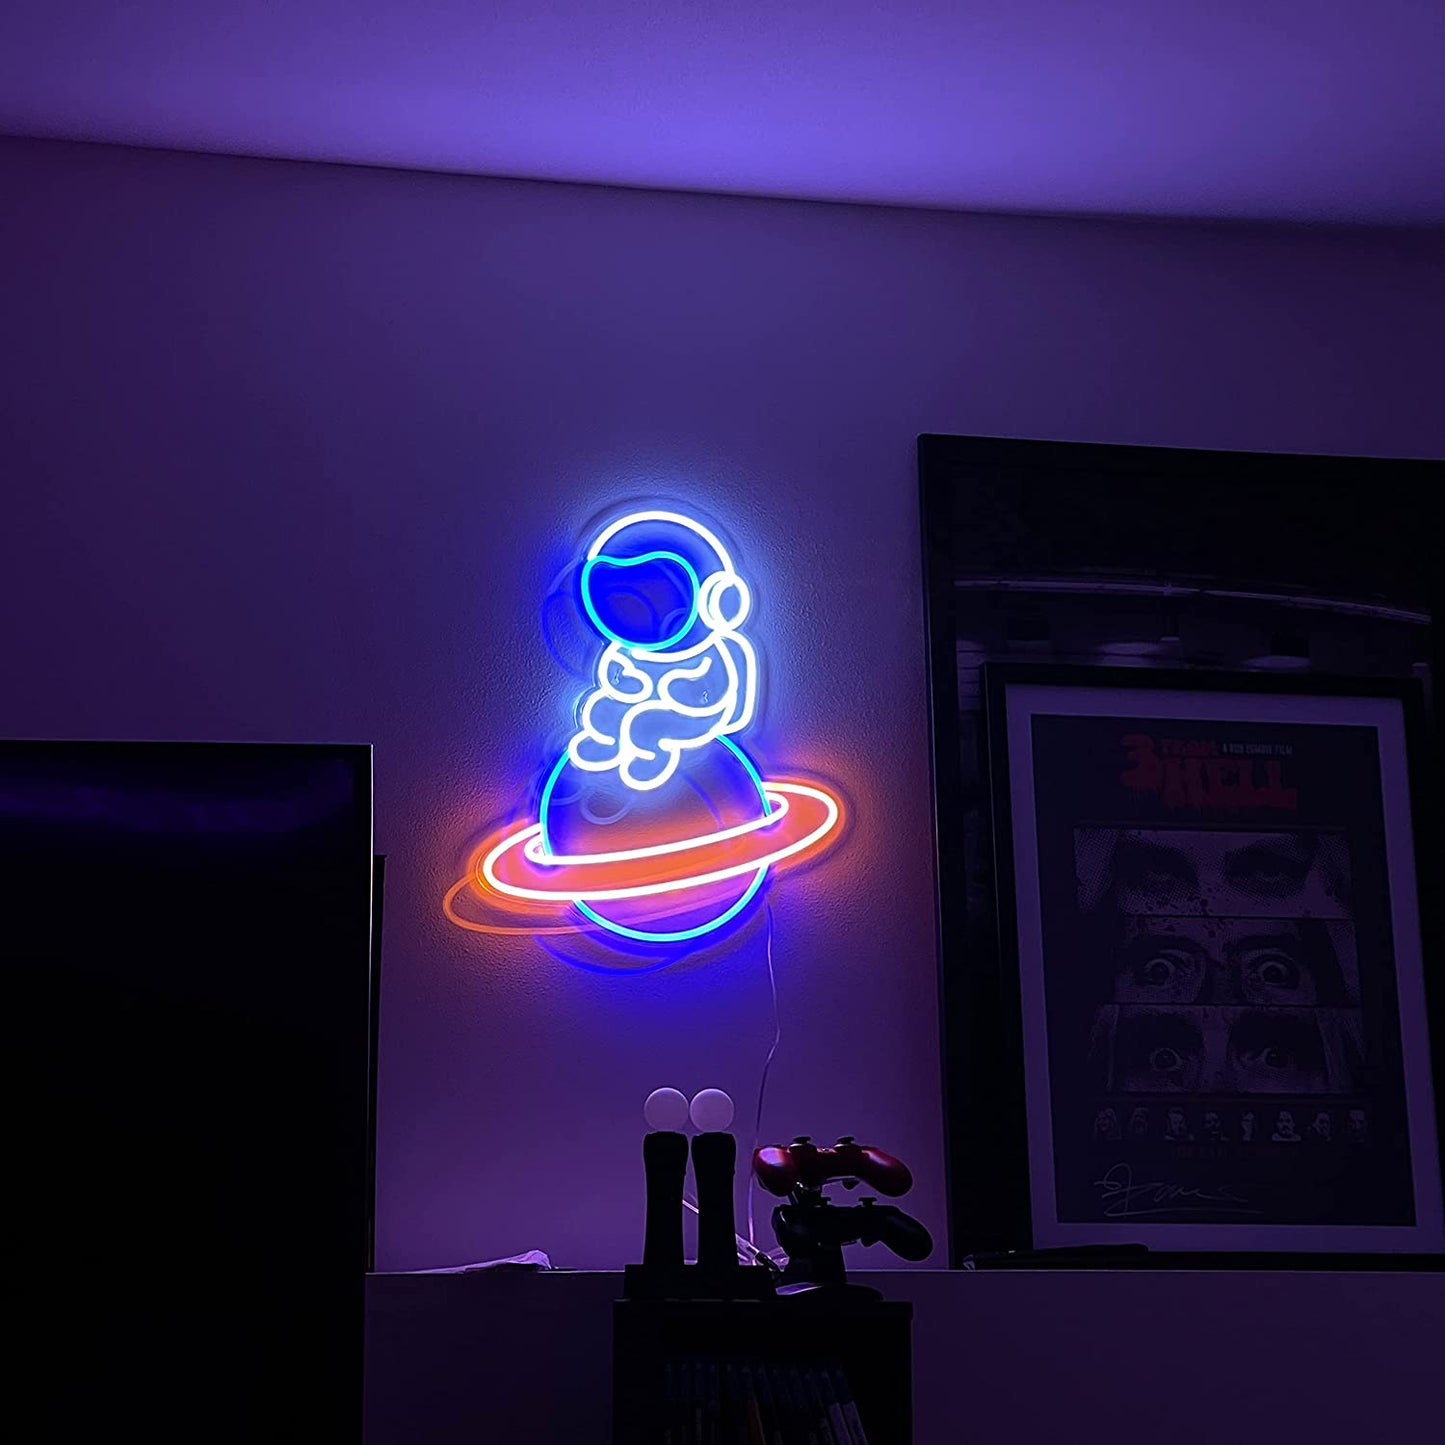 Astronaut Sitting on A Planet LED Sign 12V Neon Light 19.7'' Neon Wall  Light for Bedroom, Game Room, Party, Club Decorative Big Astronaut Sign  Space